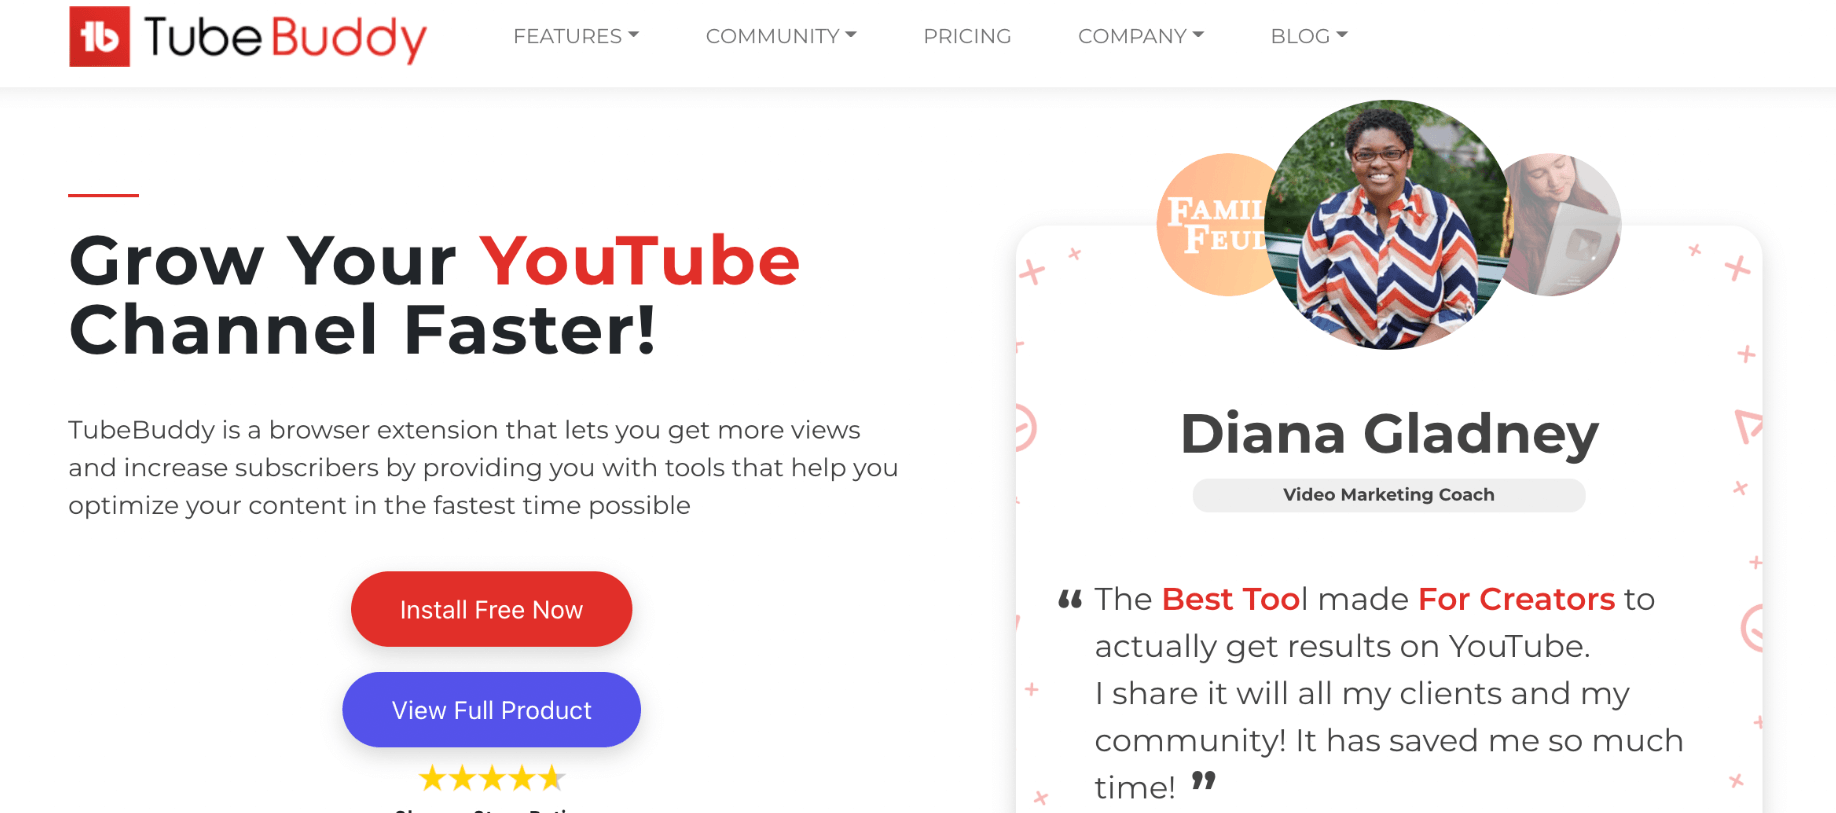 TubeBuddy homepage: Grow Your YouTube Channel Faster!